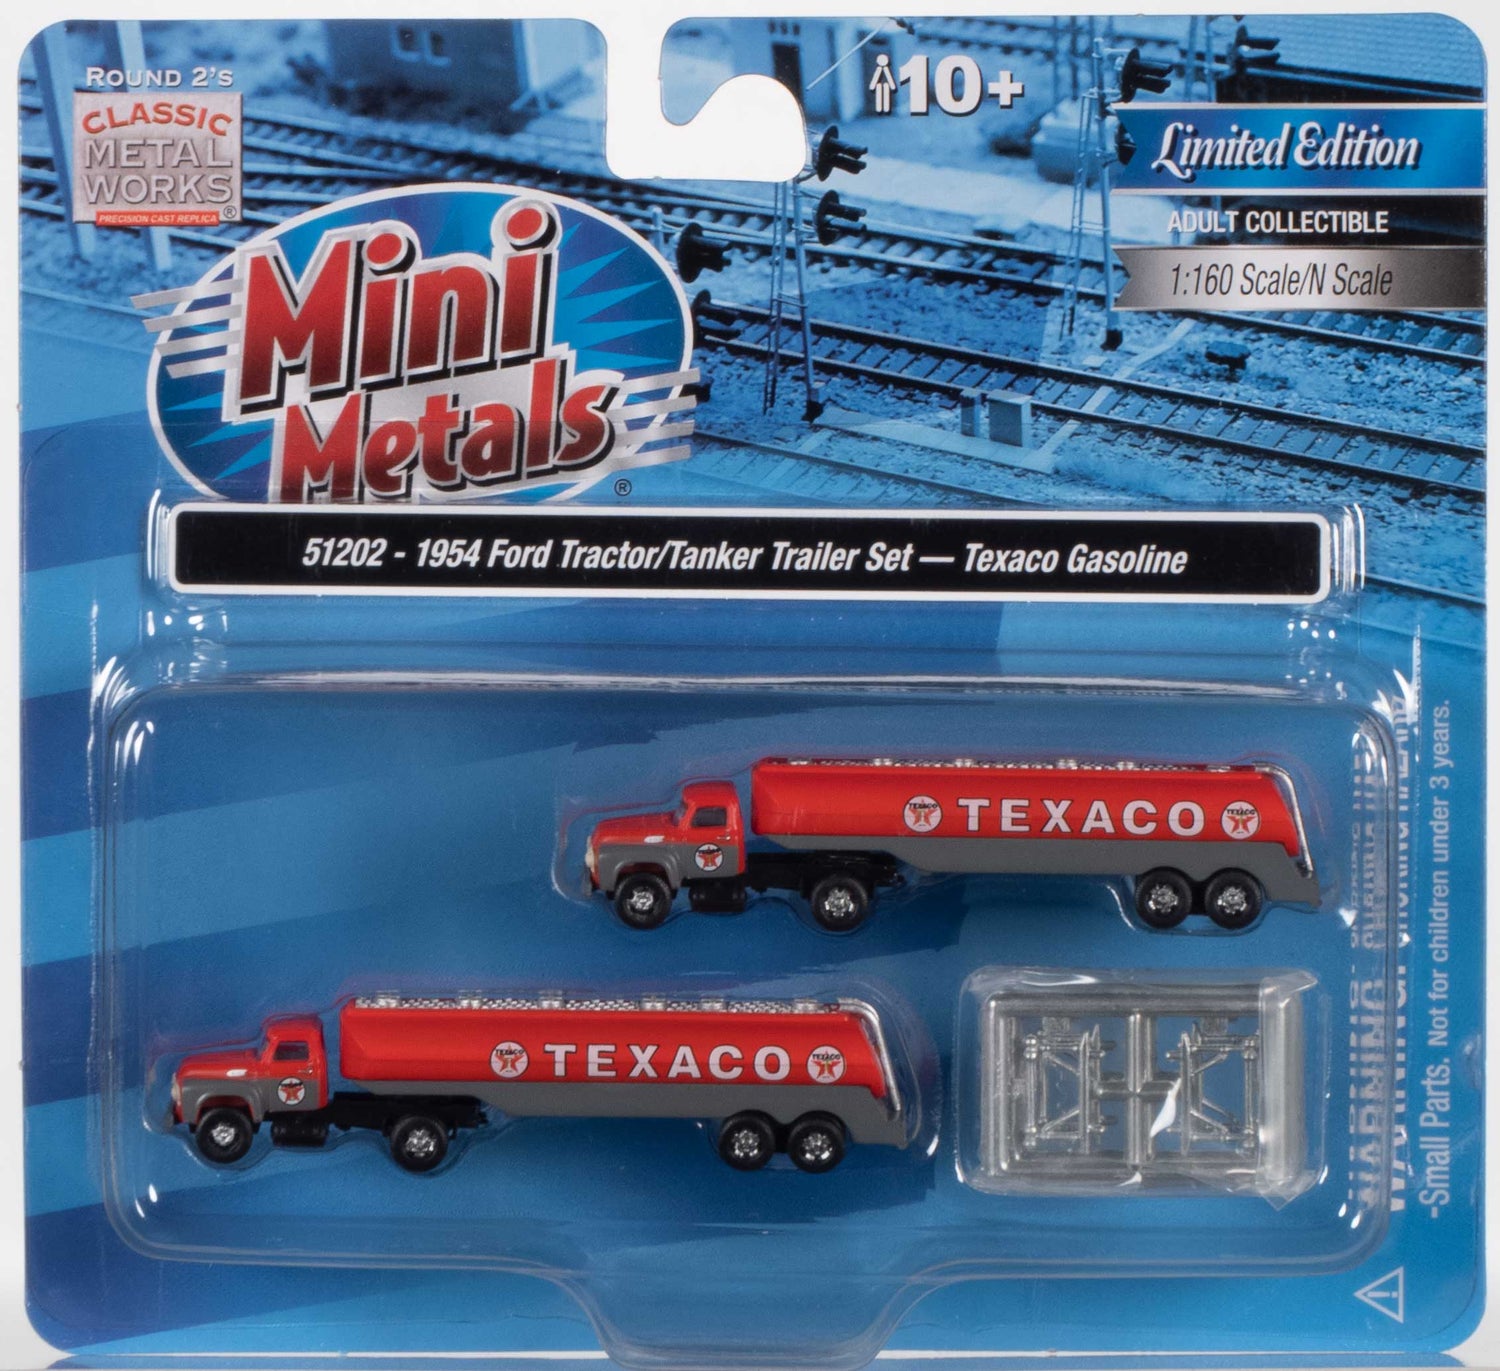 Classic Metal Works 1954 Ford Tractor w/Tanker Trailer (Texaco) (2-Pack) 1:160 N Scale